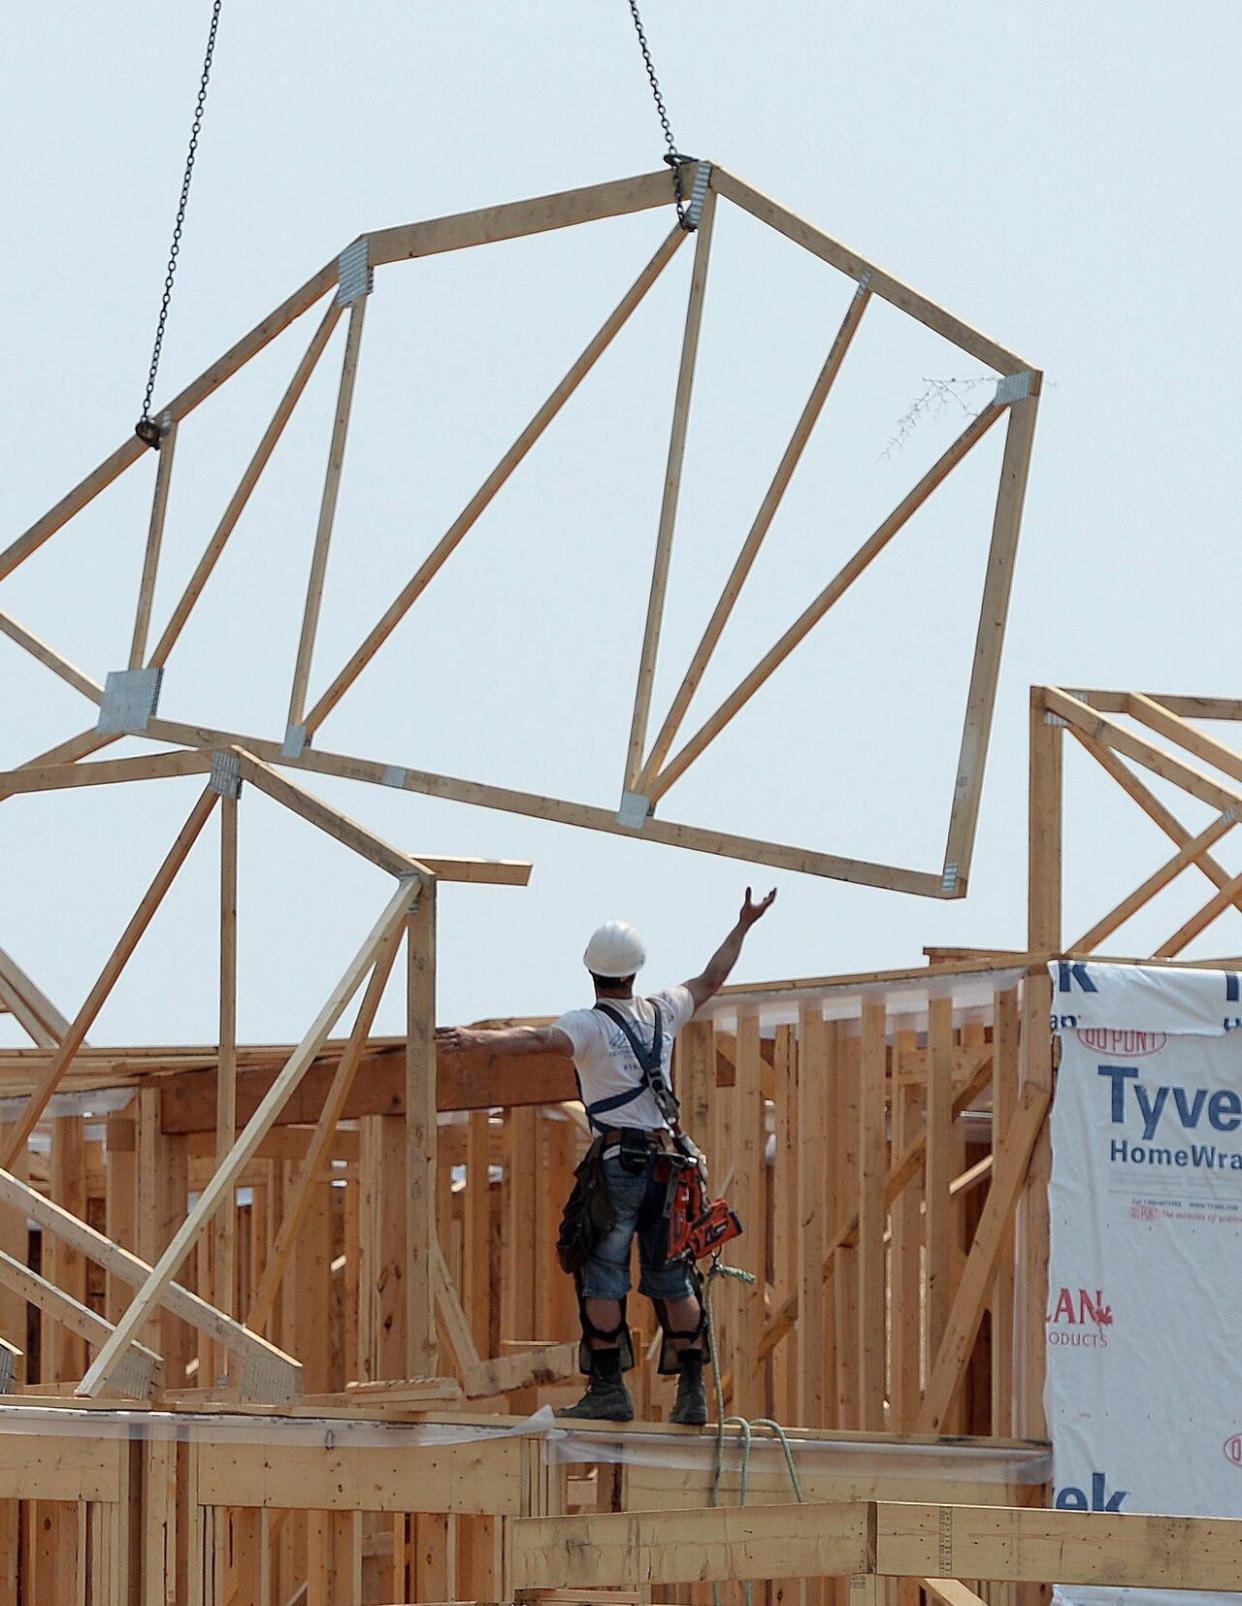 Construction workers build new homes in a development in Ottawa on Monday, July 6, 2015. Canada Mortgage and Housing Corp. says the annual pace of housing starts picked up in March. (Sean Kilpatrick/The Canadian Press - image credit)